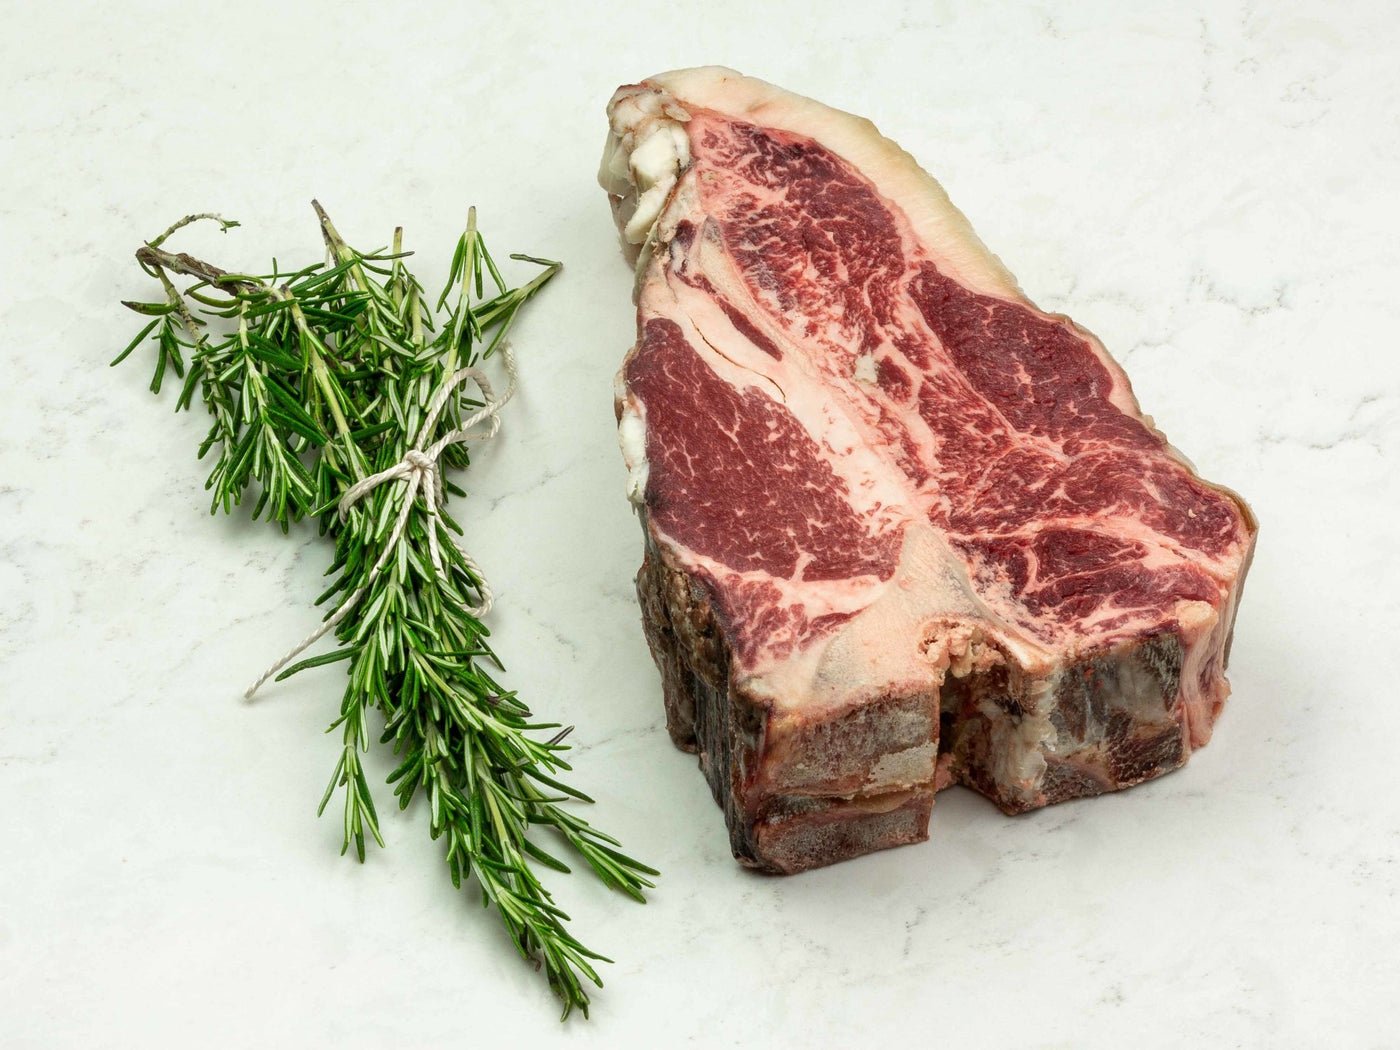 Dry-Aged Basque Region Bone In Loin Section - Beef - Thomas Joseph Butchery - Ethical Dry-Aged Meat The Best Steak UK Thomas Joseph Butchery